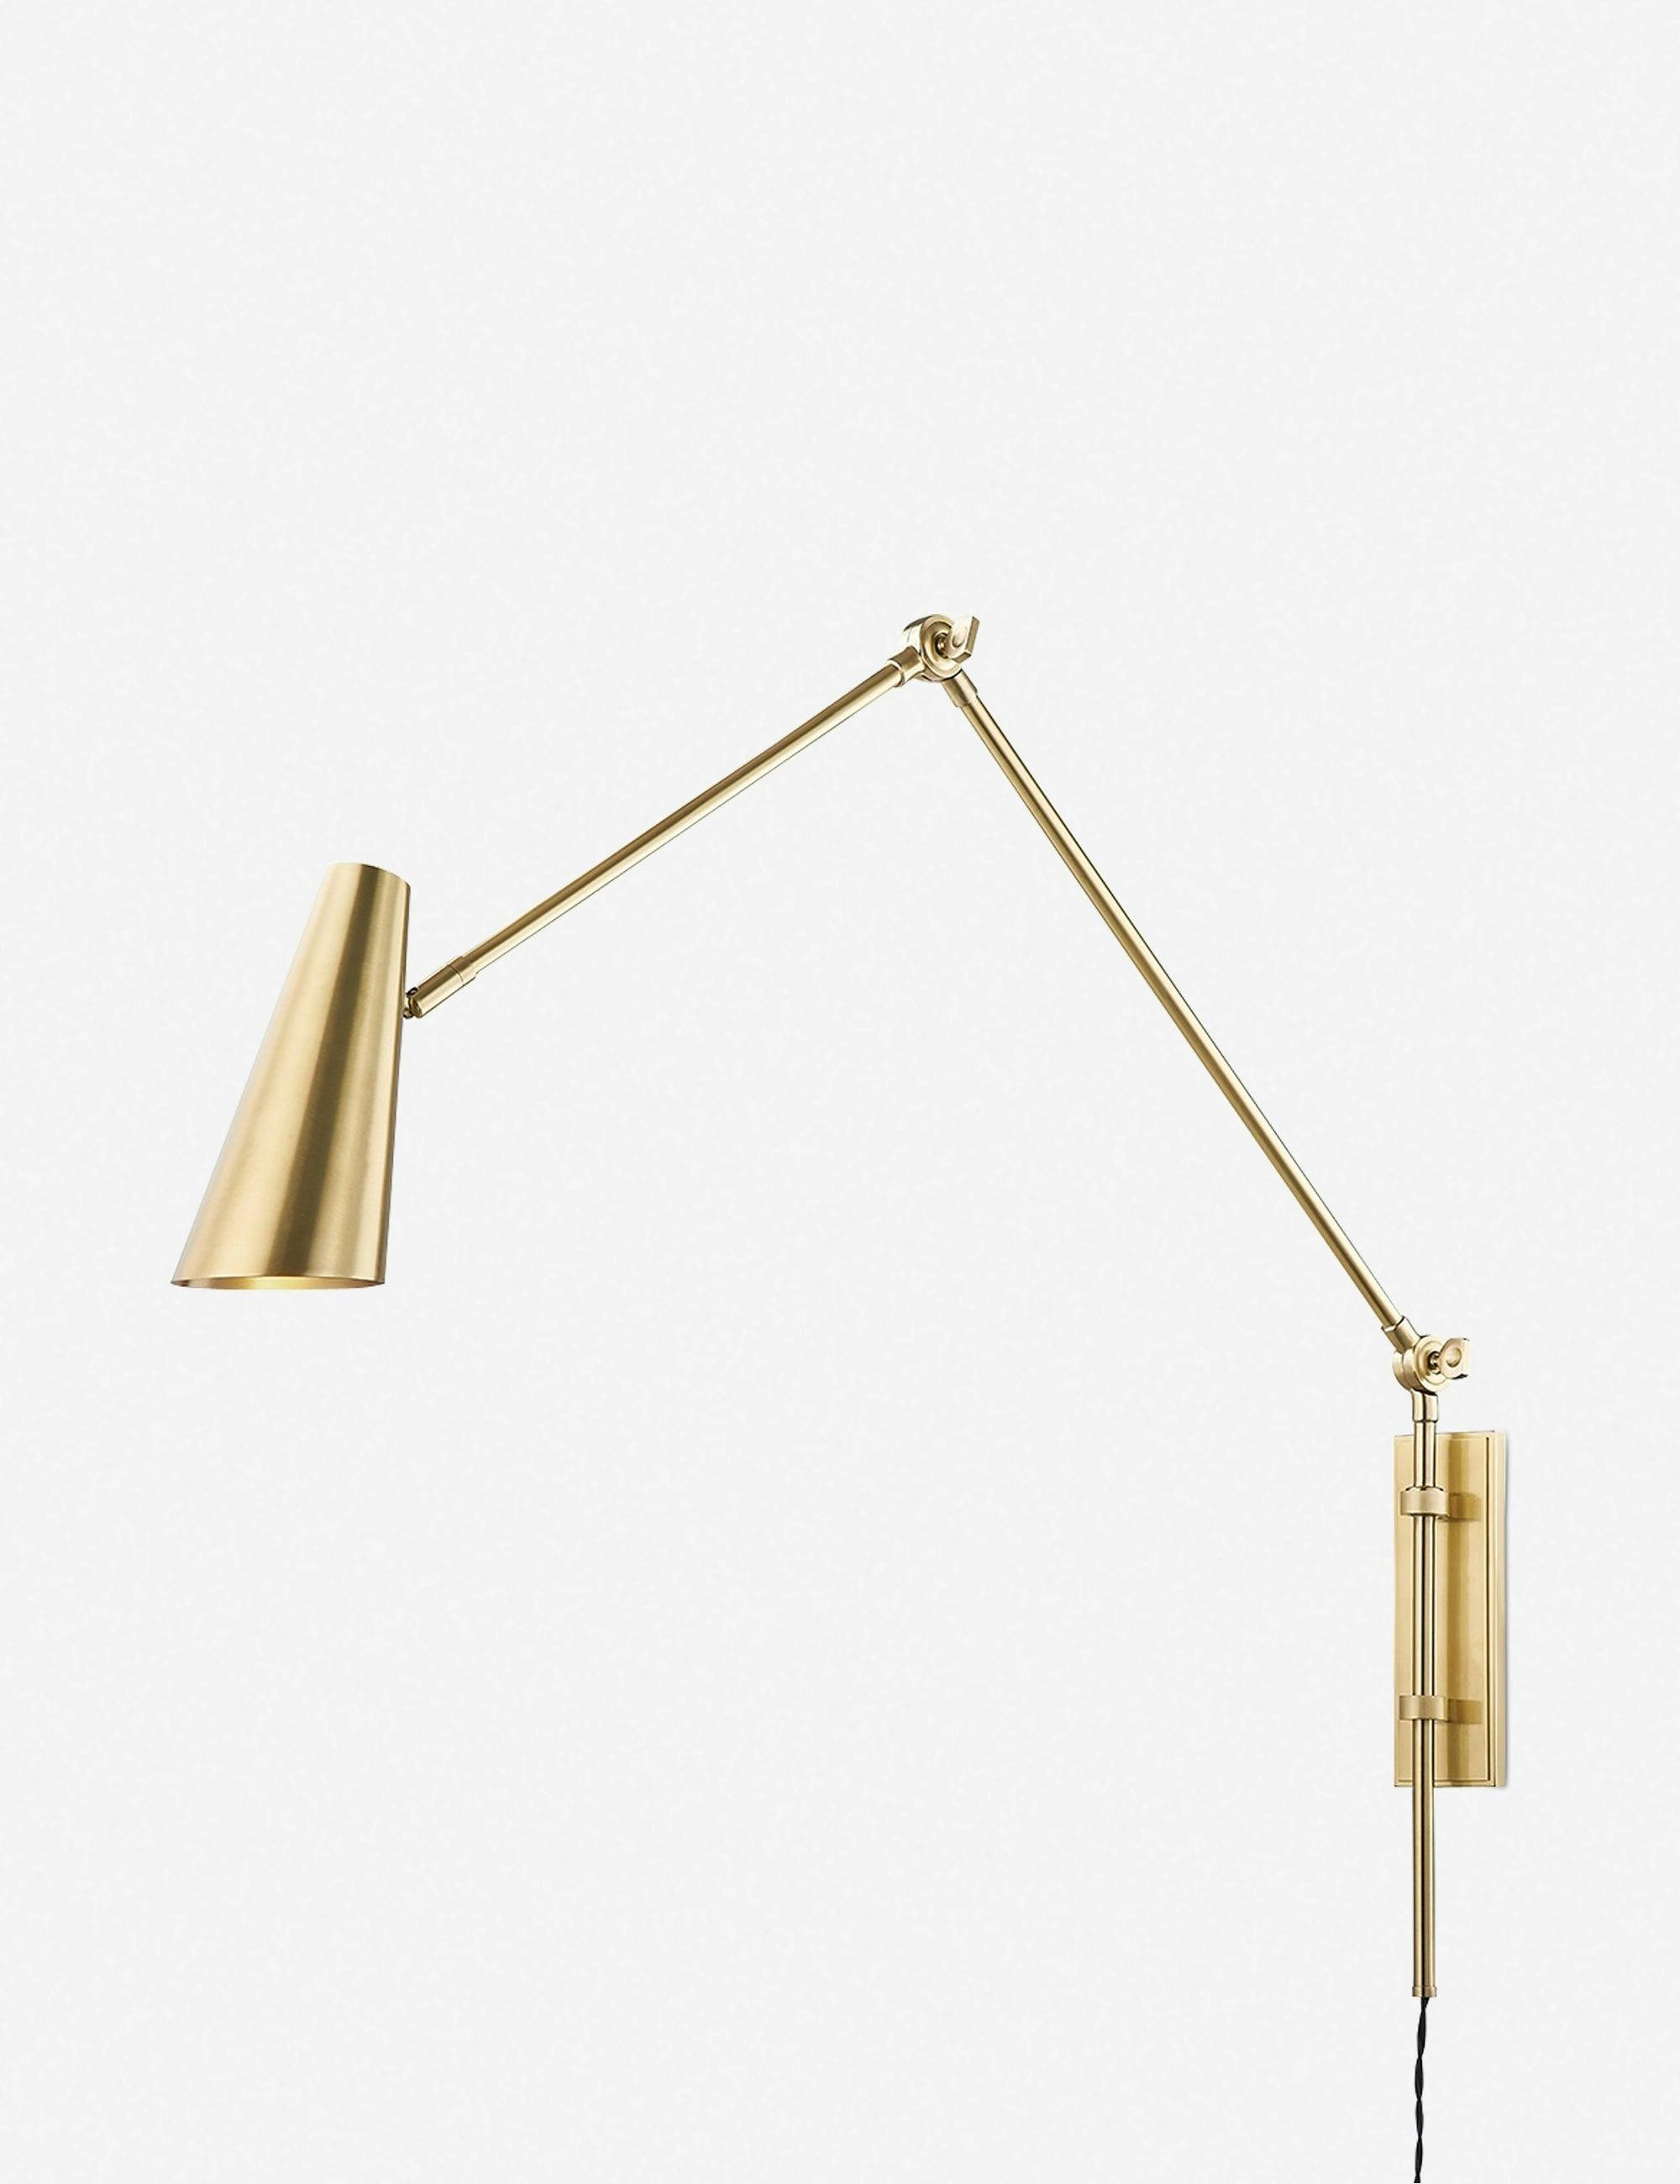 Elegant Aged Brass Dimmable Cone Sconce with Adjustable Arm